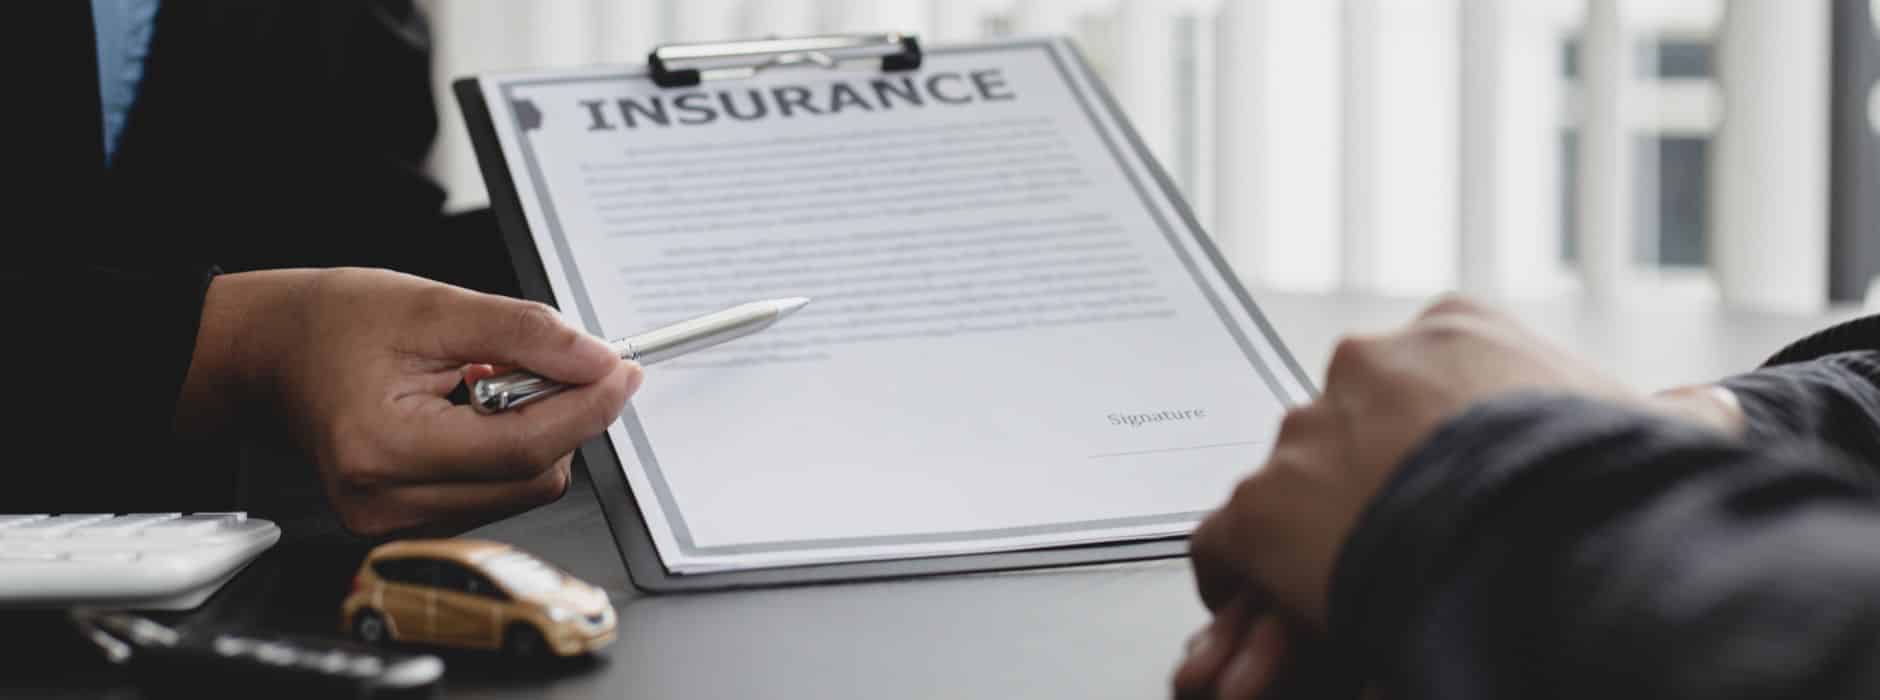 Top 7 Insurance Questions ANSWERED